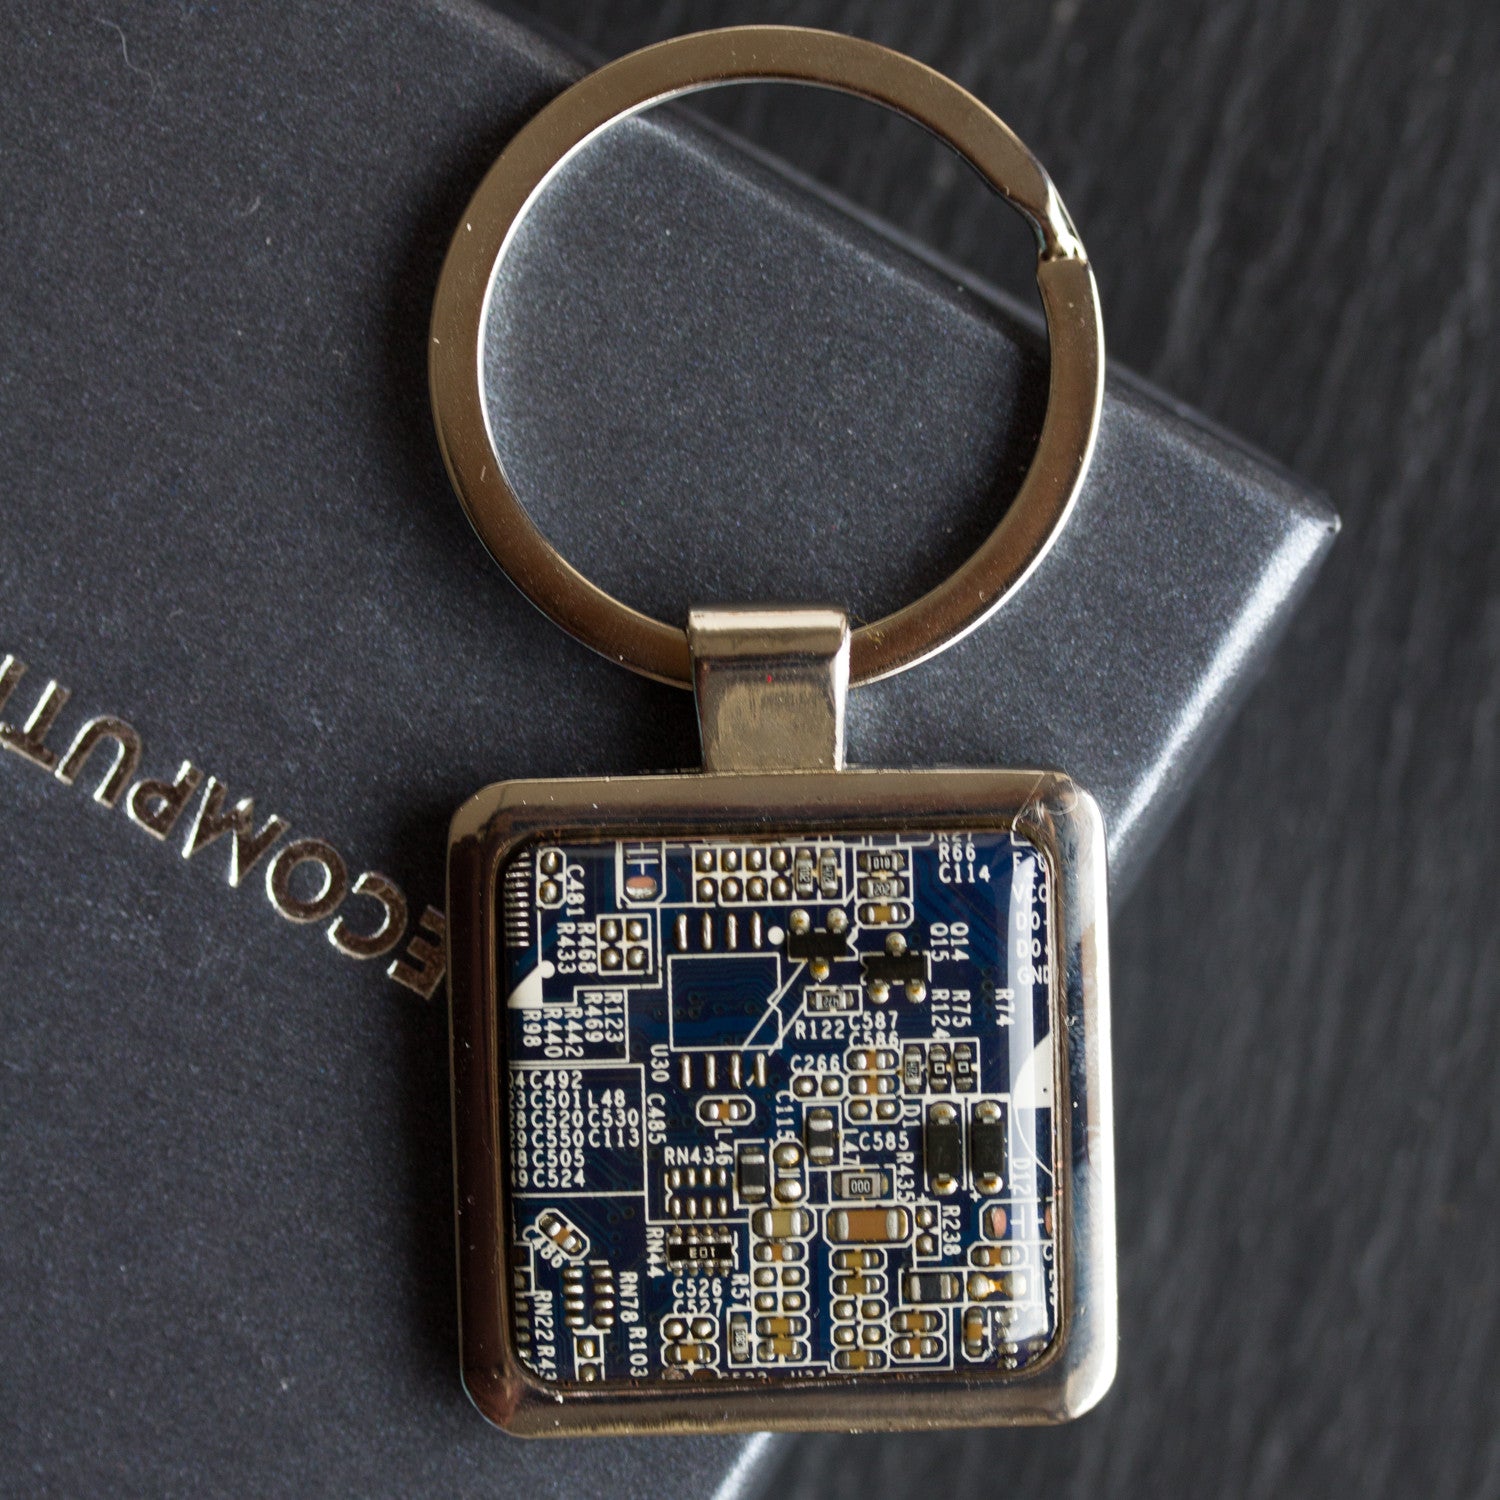 Unique keychain with circuit board piece